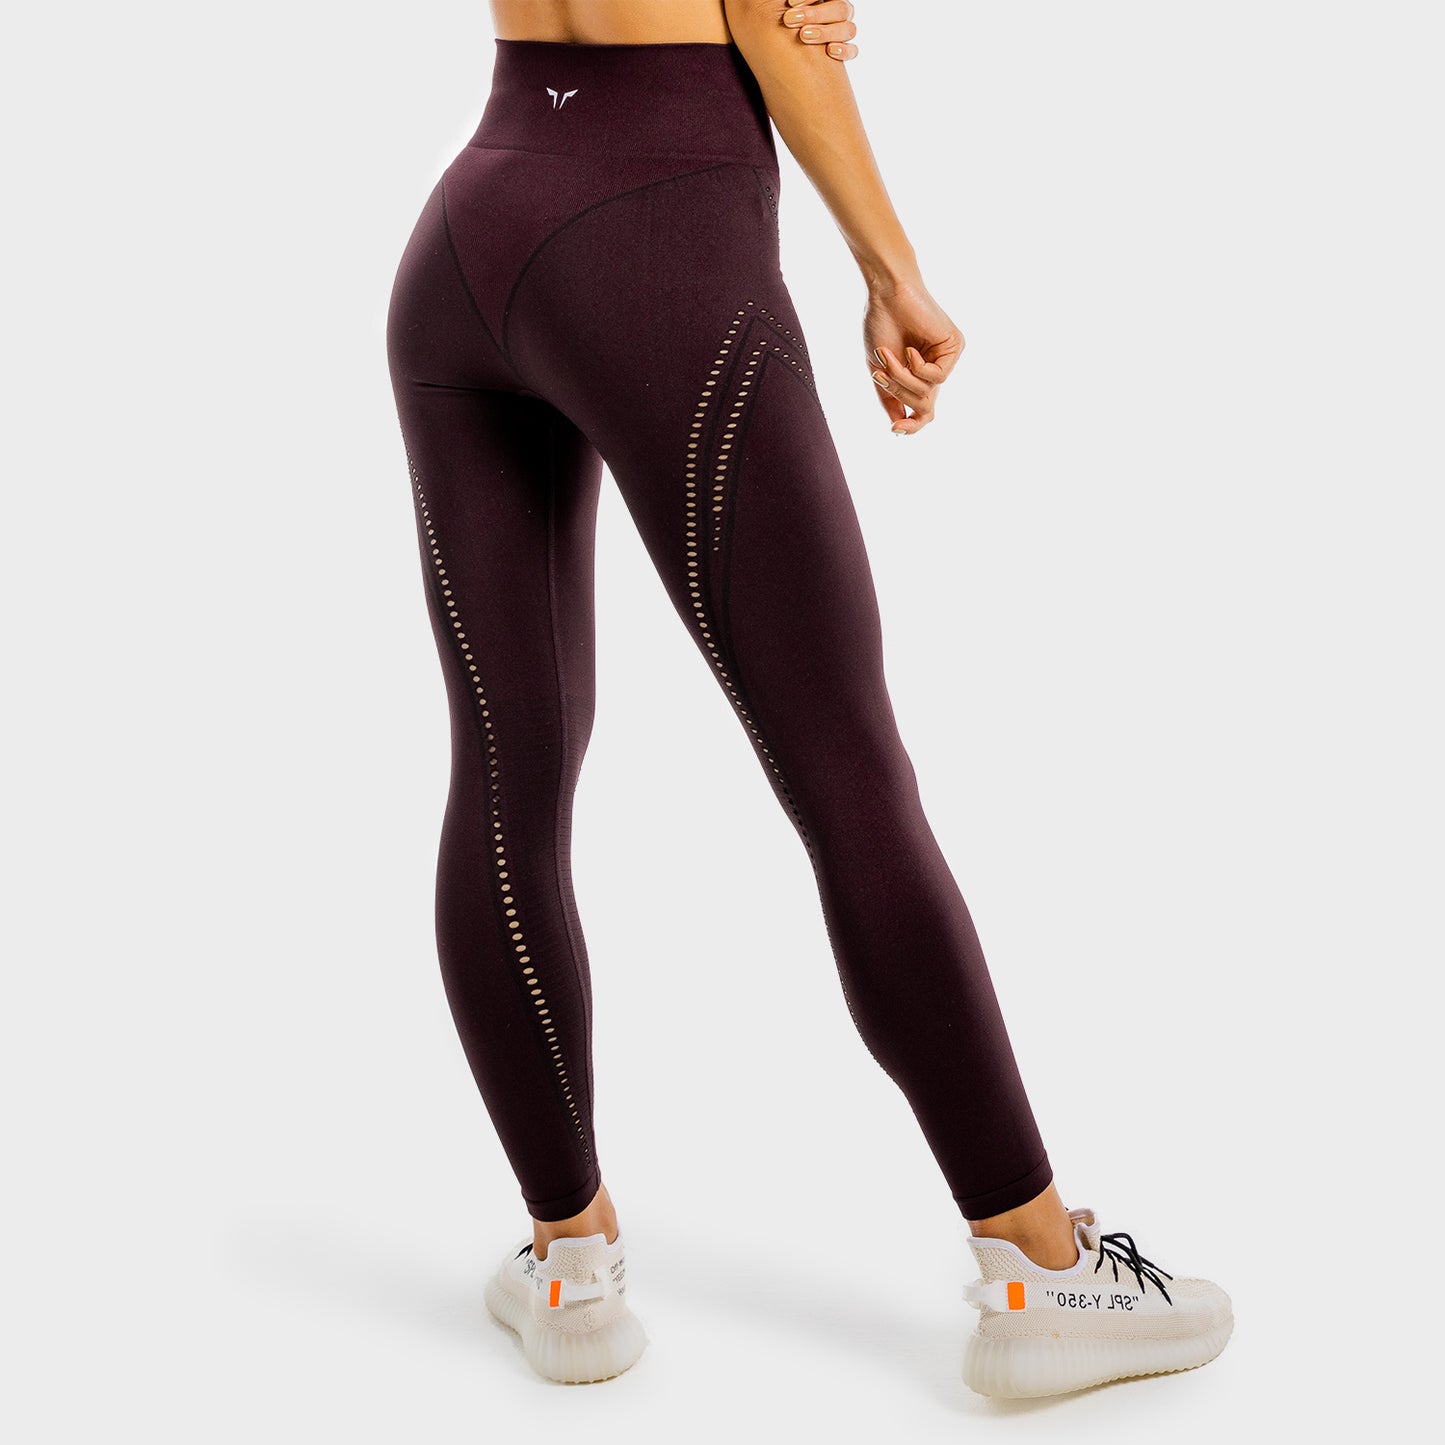 squatwolf-gym-leggings-for-women-ultra-seamless-leggings-burgundy-workout-clothes